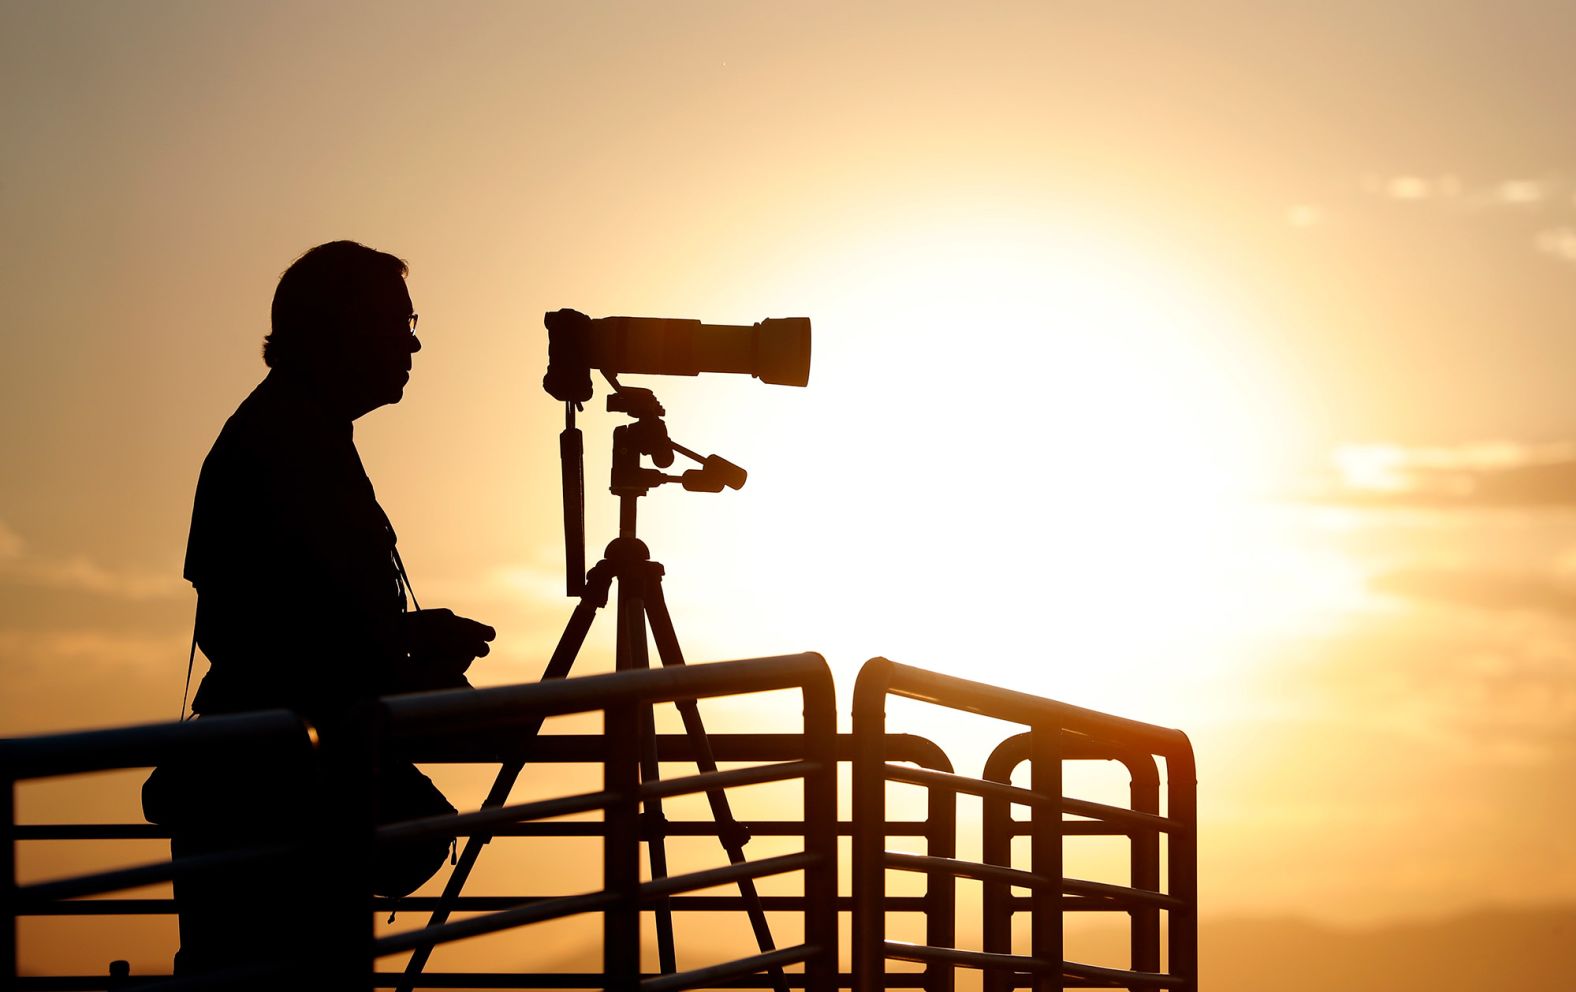 A photographer prepares his camera as the sun rises over Spaceport America.